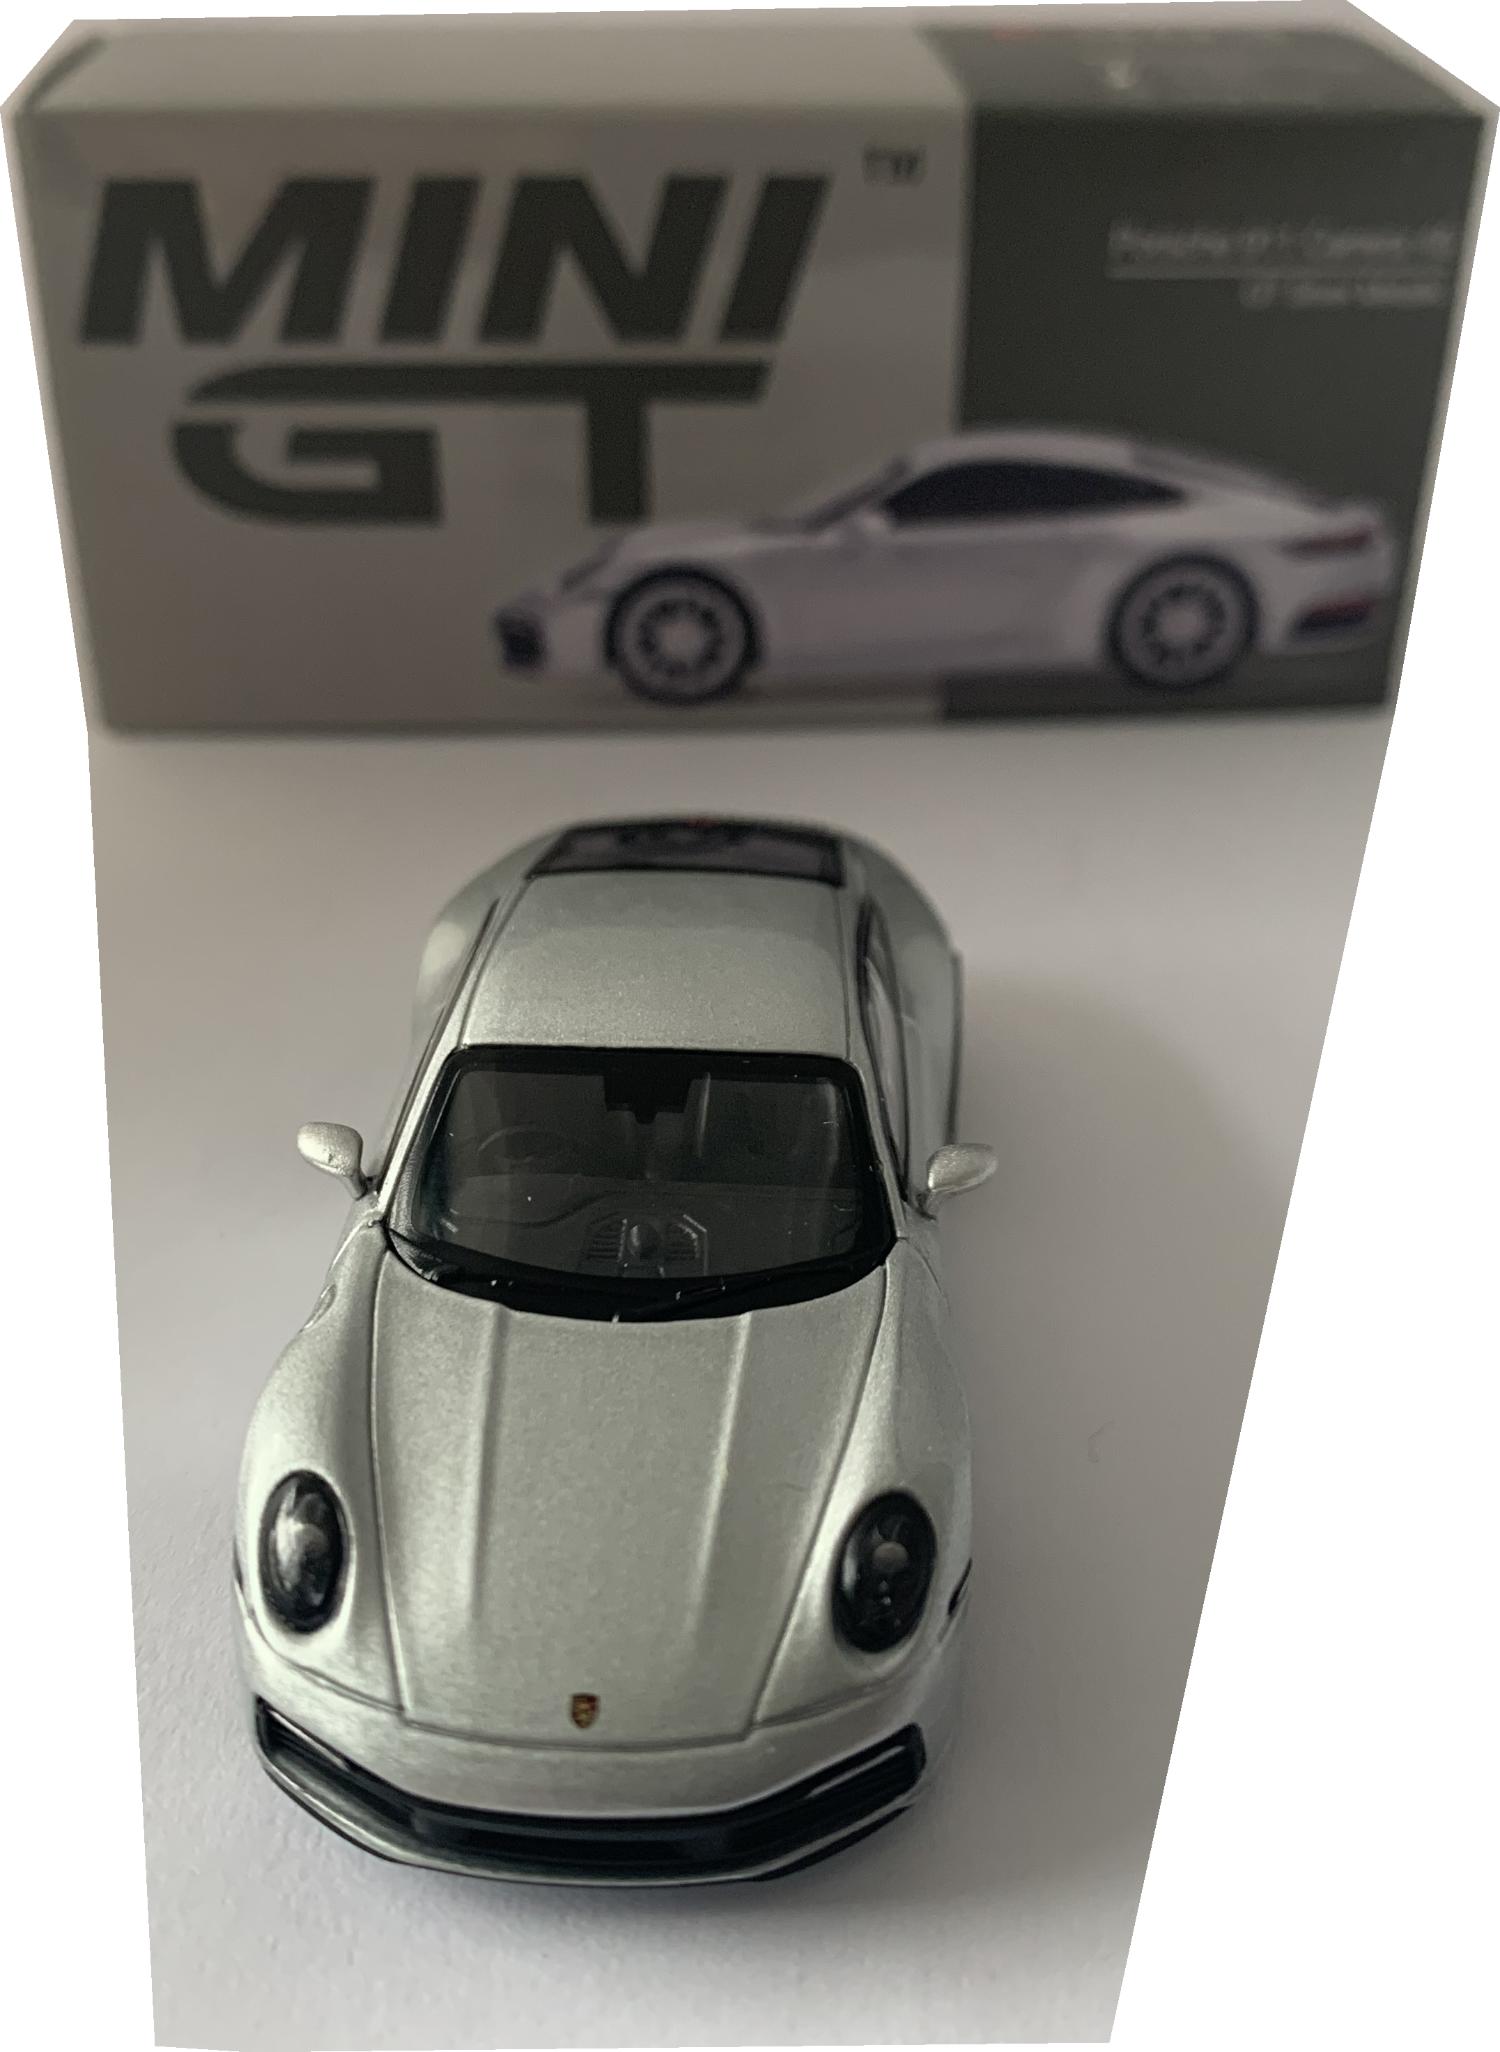 A good reproduction of the Porsche 911 Carrera 4S with detail throughout, all authentically recreated.  The model is presented in a box, the car is approx. 7 cm long and the box is 10 cm long